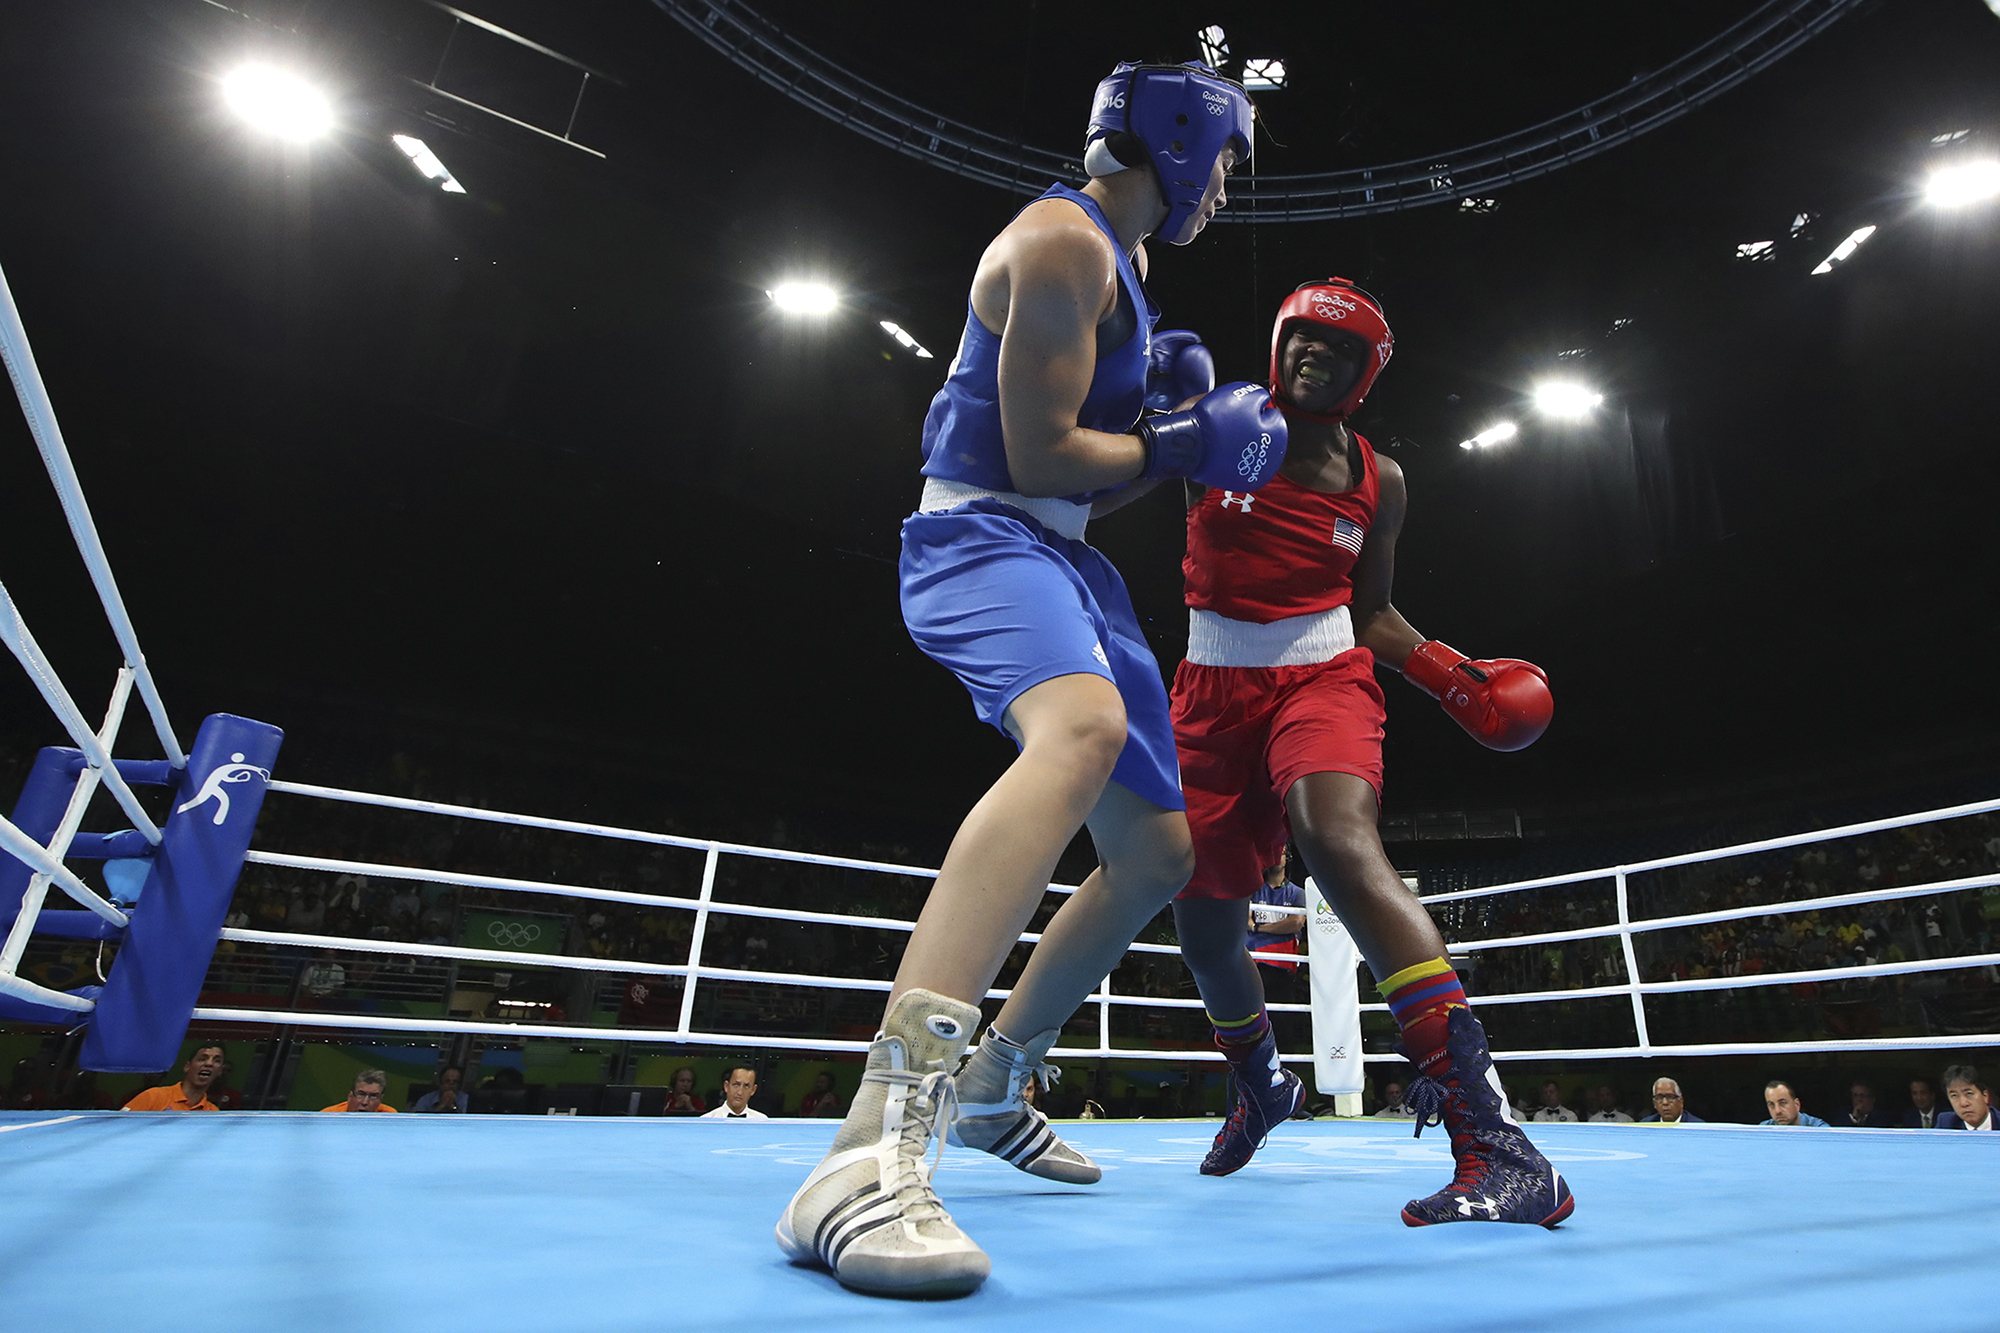 Claressa Shields defends Olympic boxing title, first US boxer to win back-to-back golds